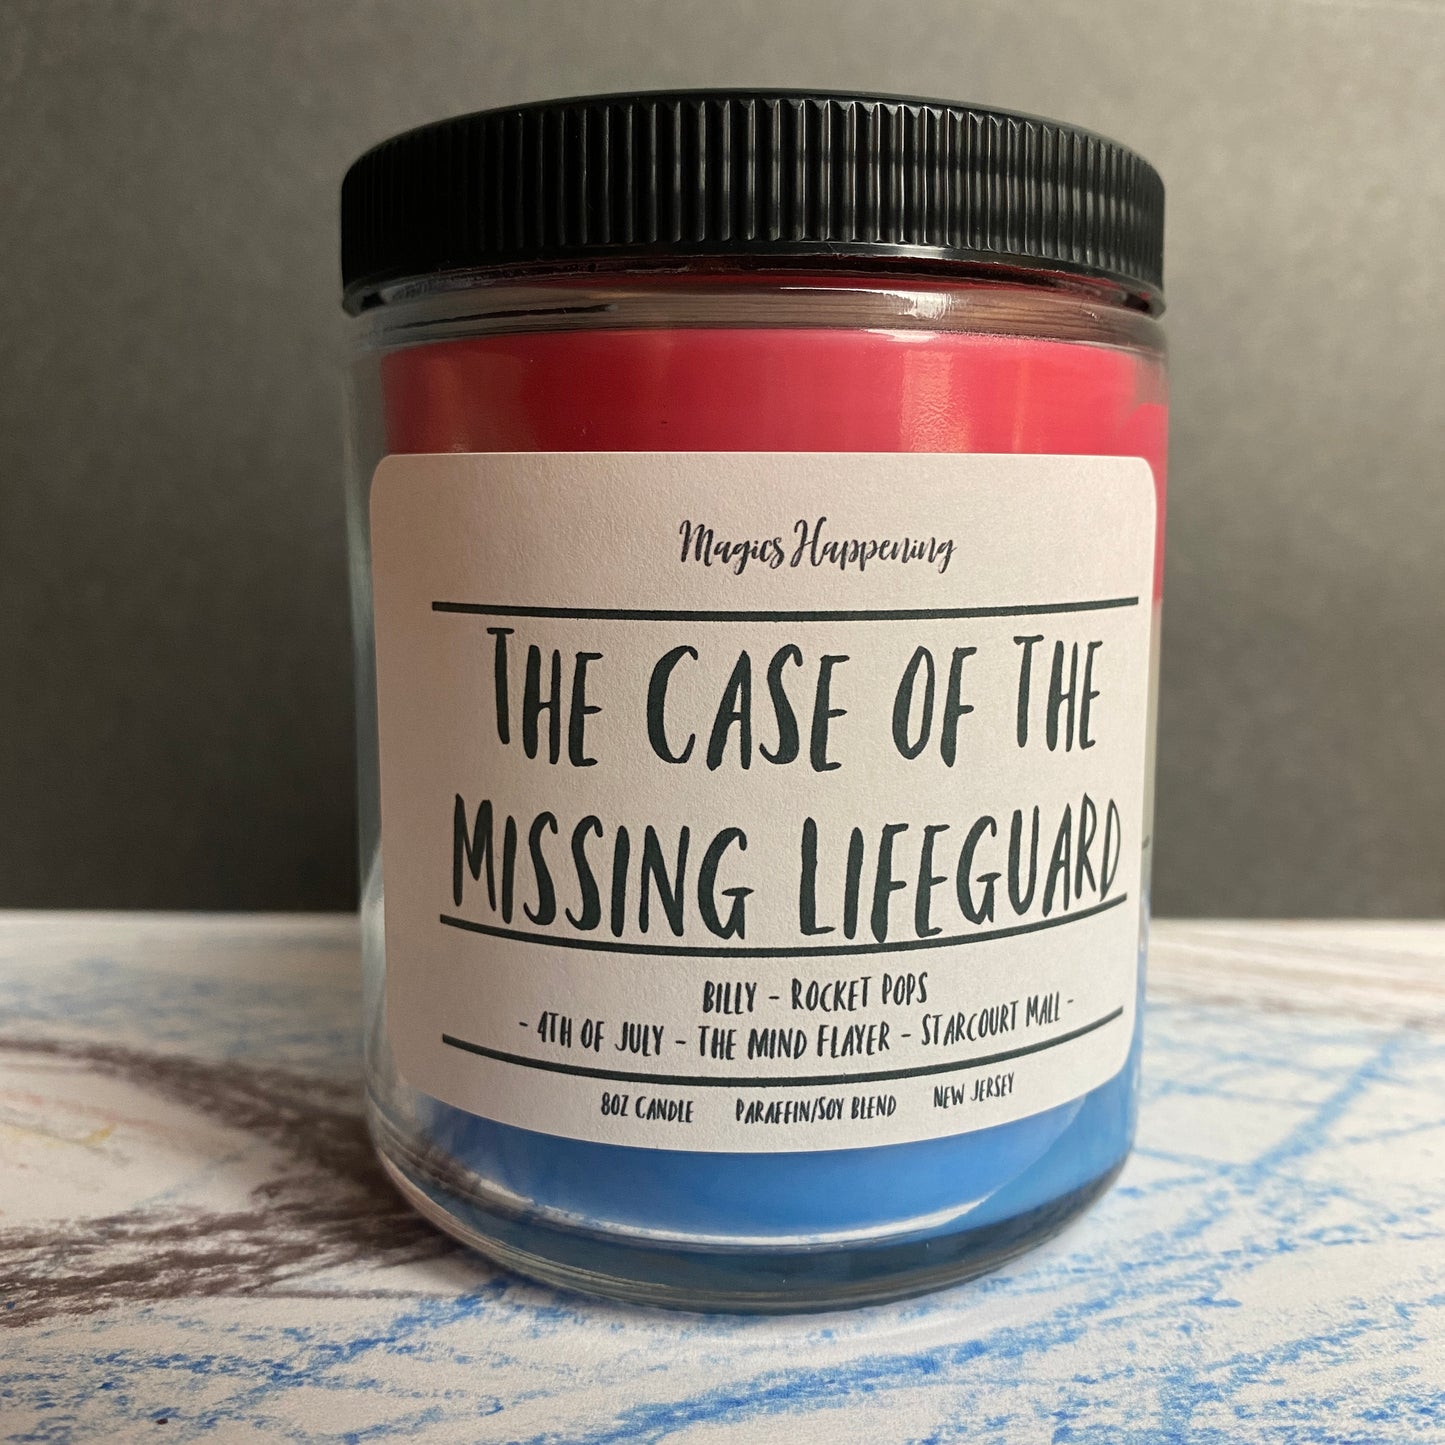 The Case of the Missing Lifeguard